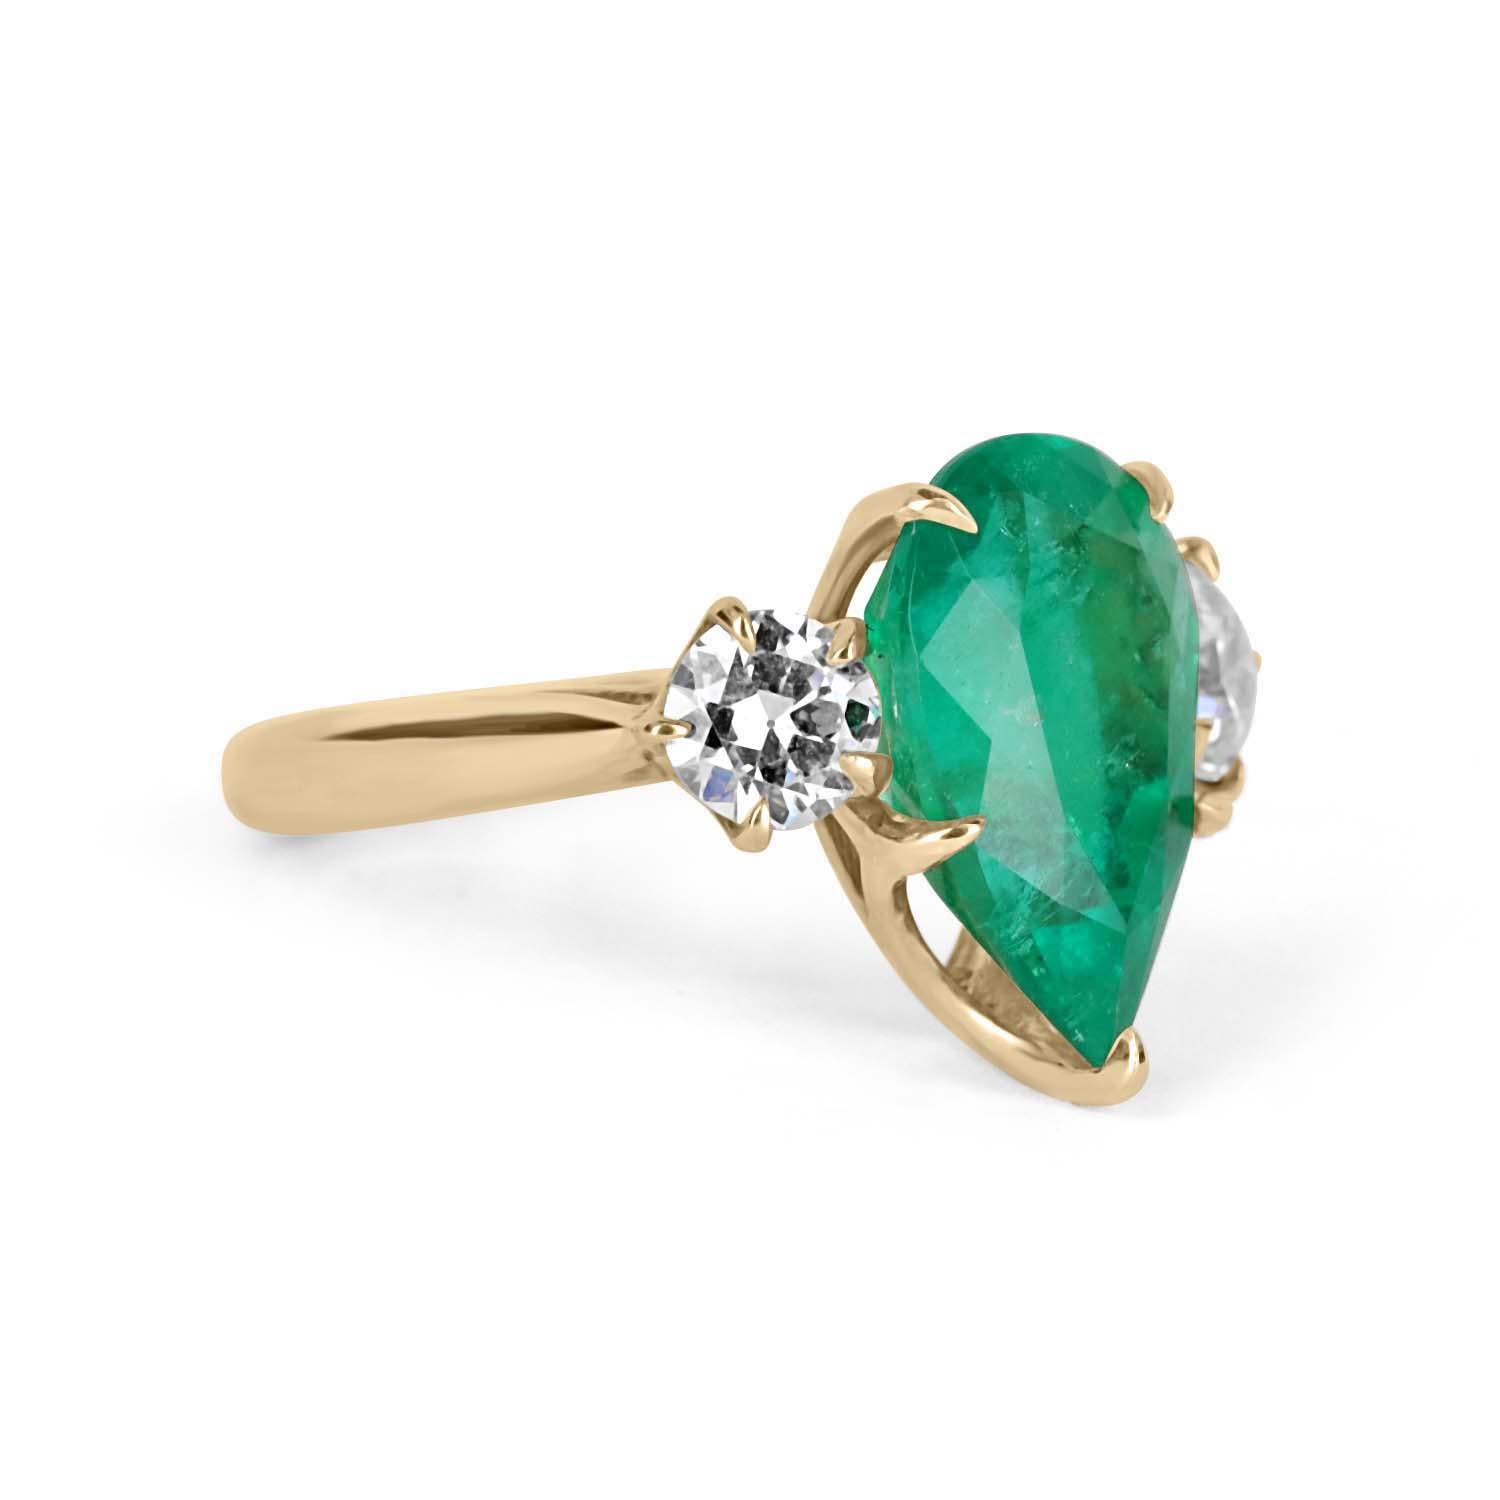 A stunning natural Colombian emerald and diamond three-stone ring. At the center is displayed a magnificent 5.74-carat natural Colombian pear cut emerald with vivid green color and visible Jardin and imperfections, making this stone a one of a kind.